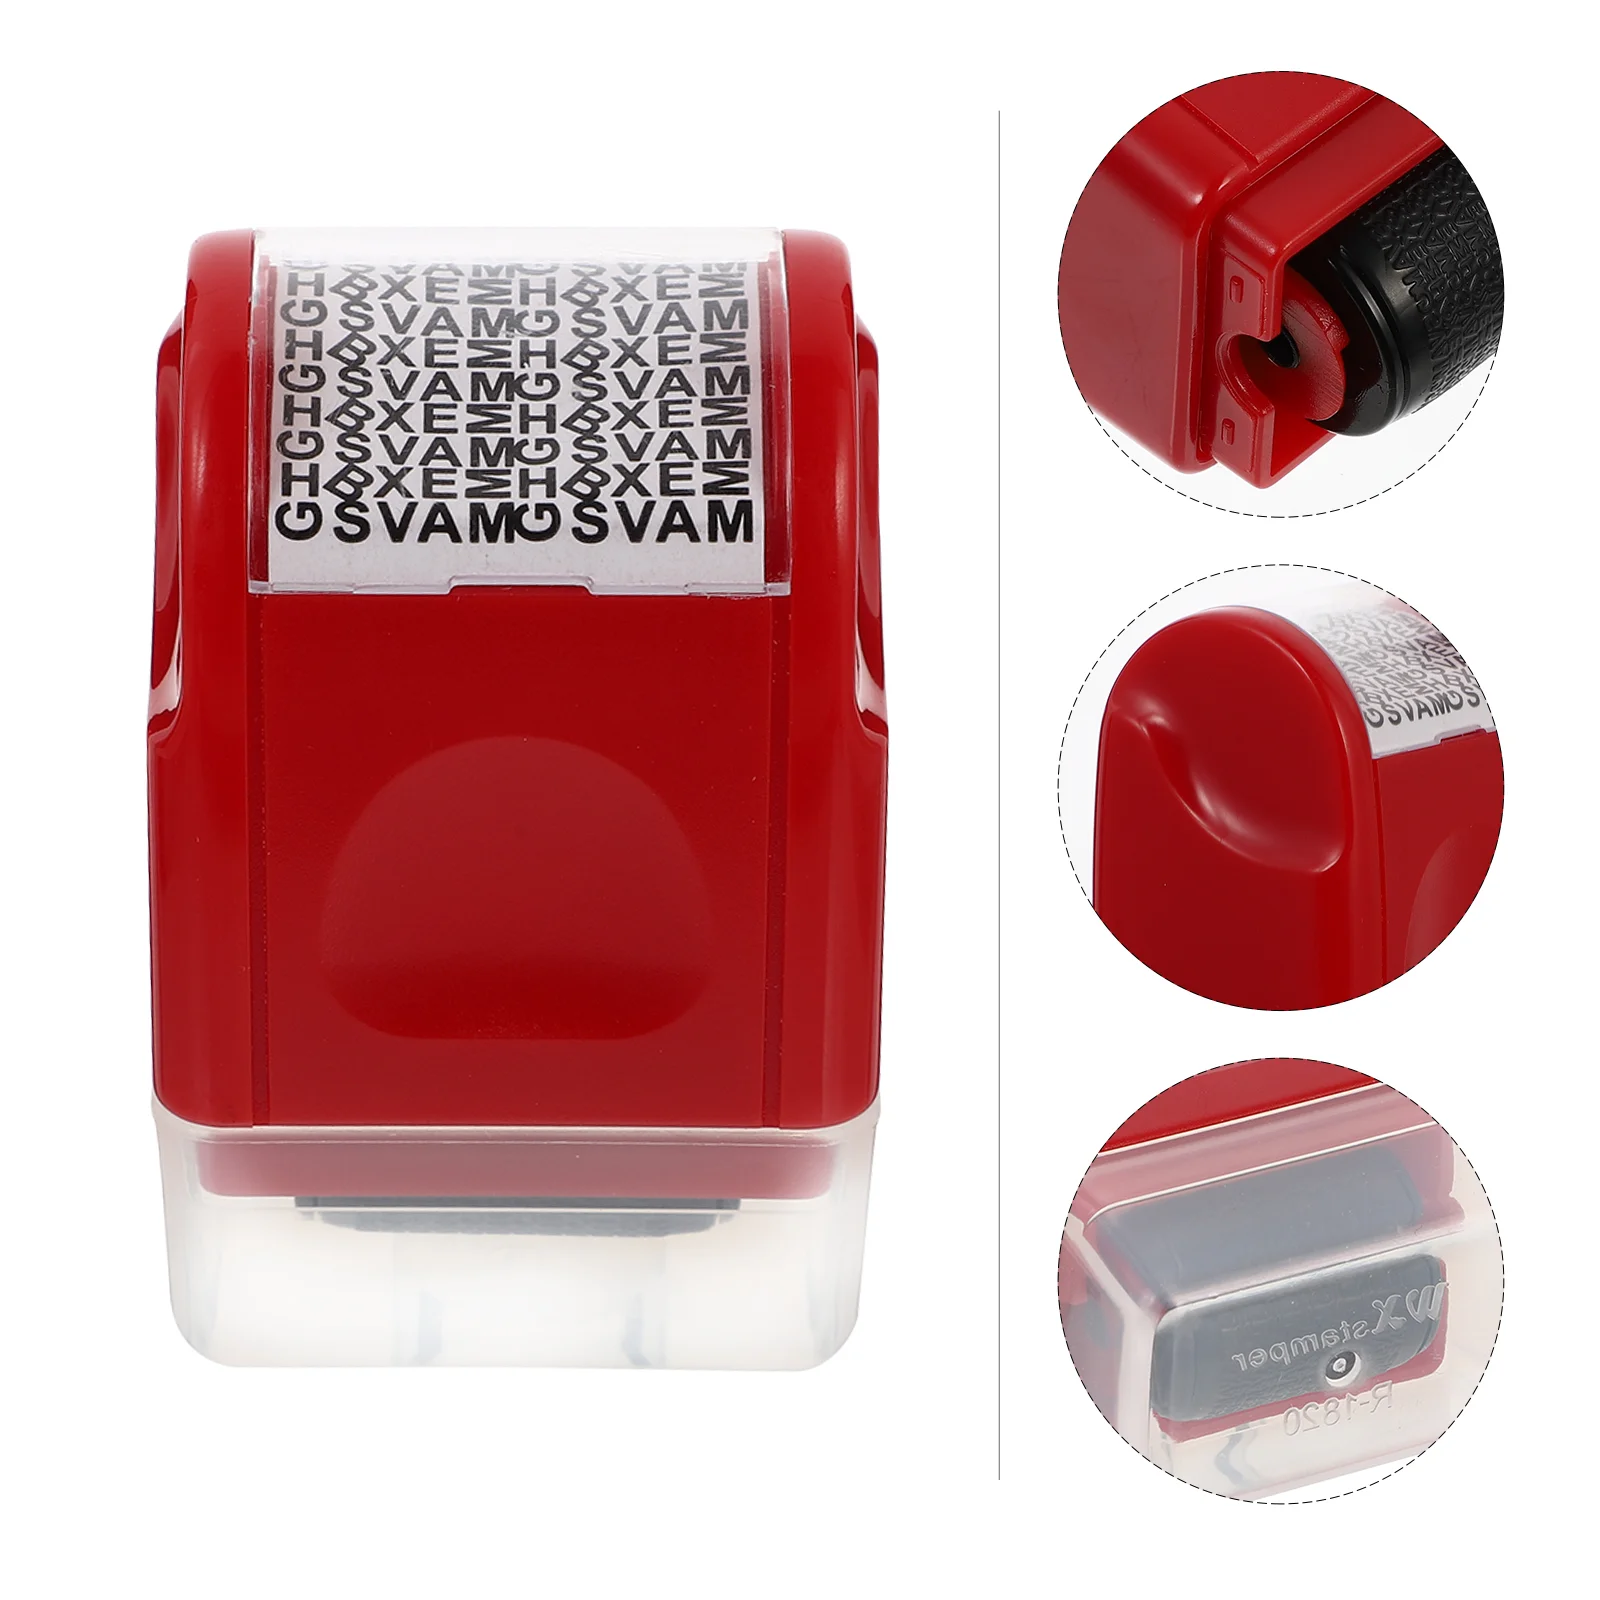 

Confidentiality Seal Privacy Protection Stamps Garbled Identity Guard Postage Handheld Hand-held Security Plastic